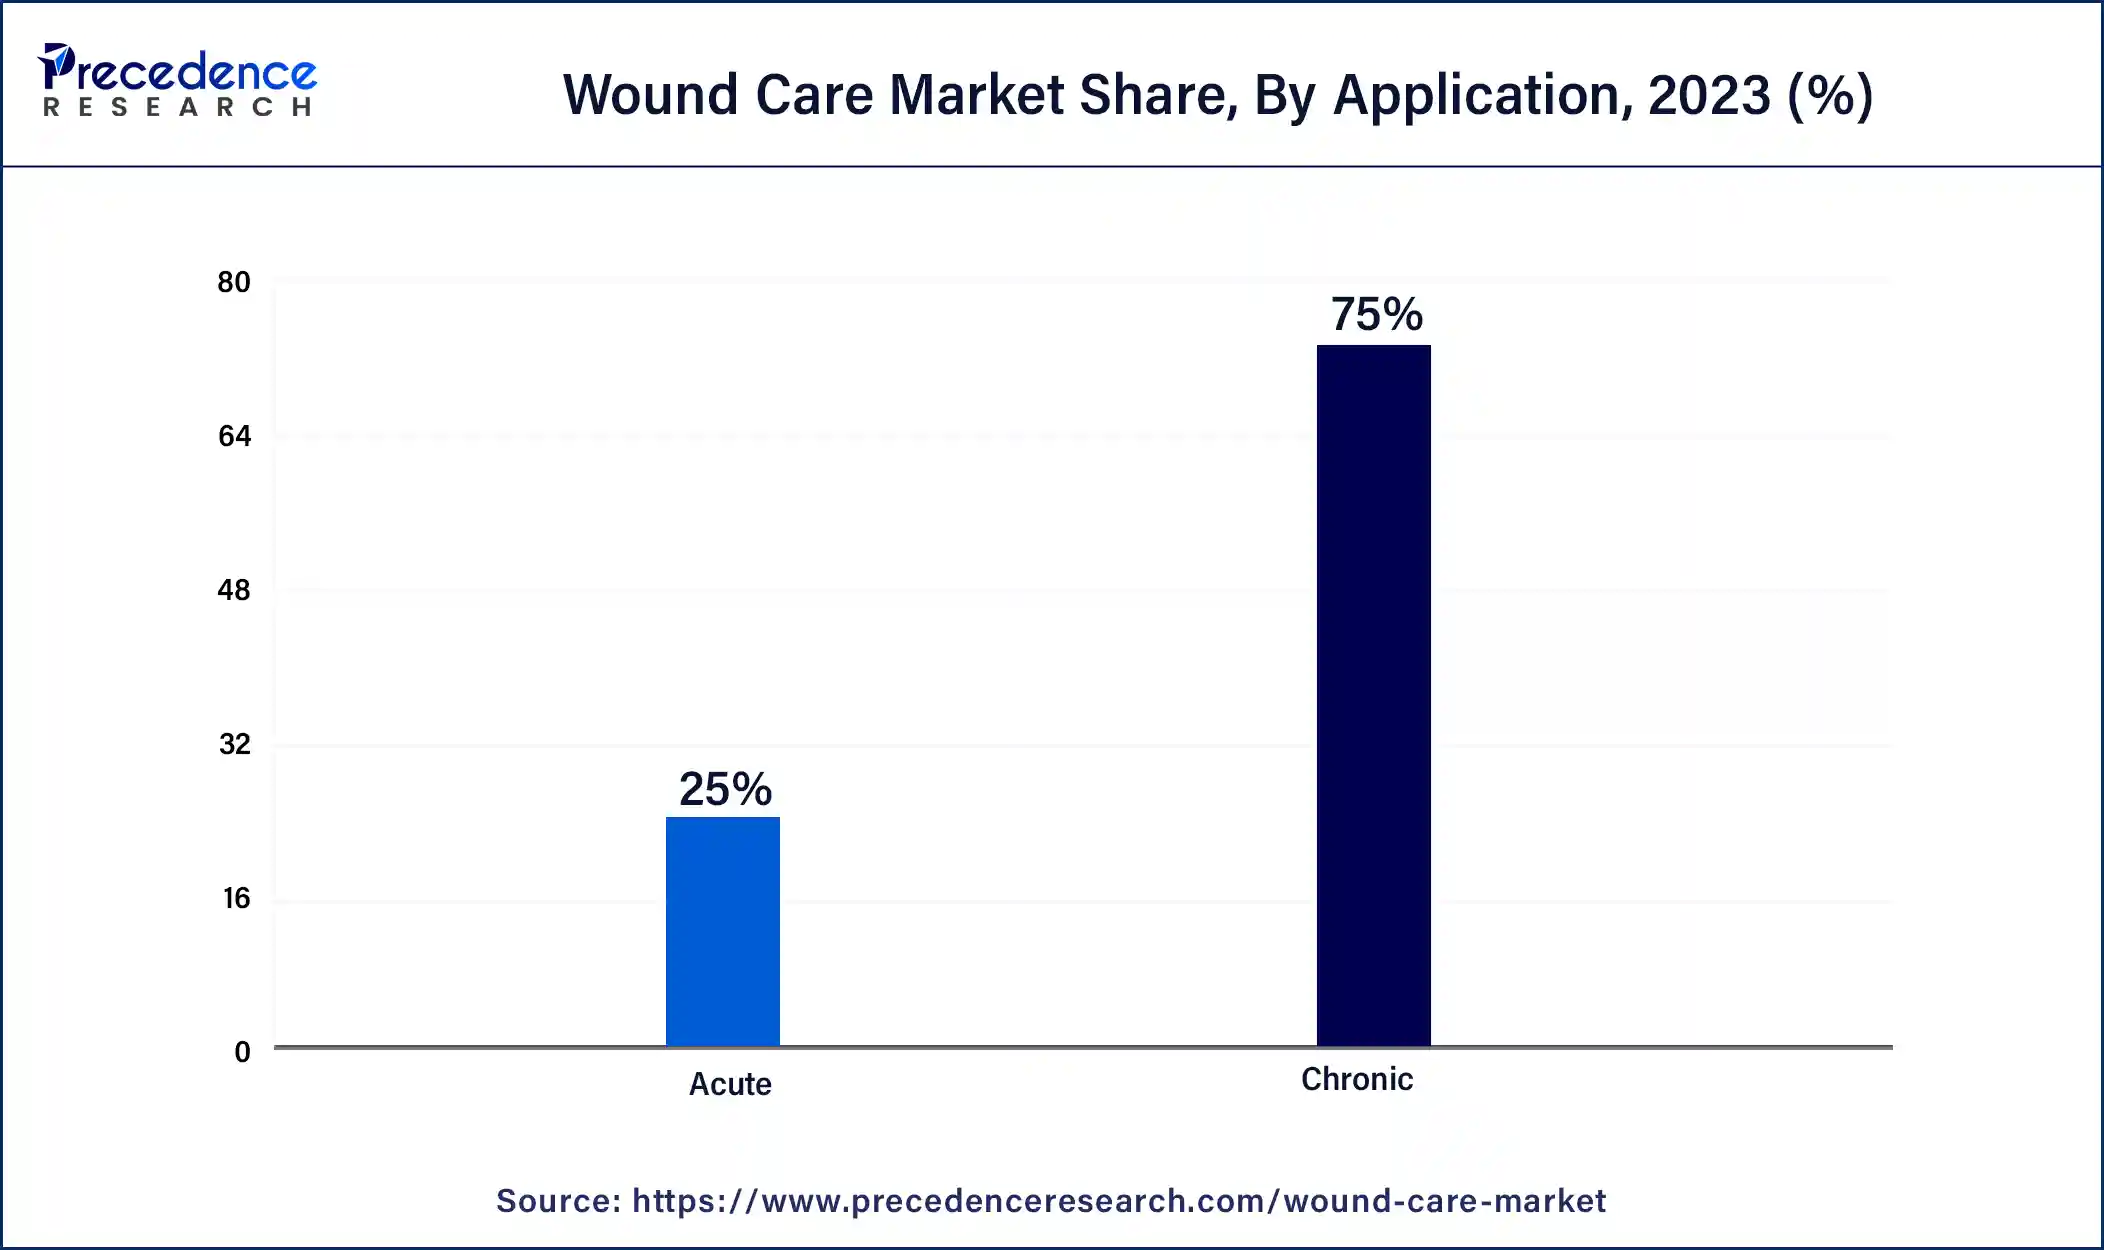 Wound Care Market Share, By Application, 2023 (%)